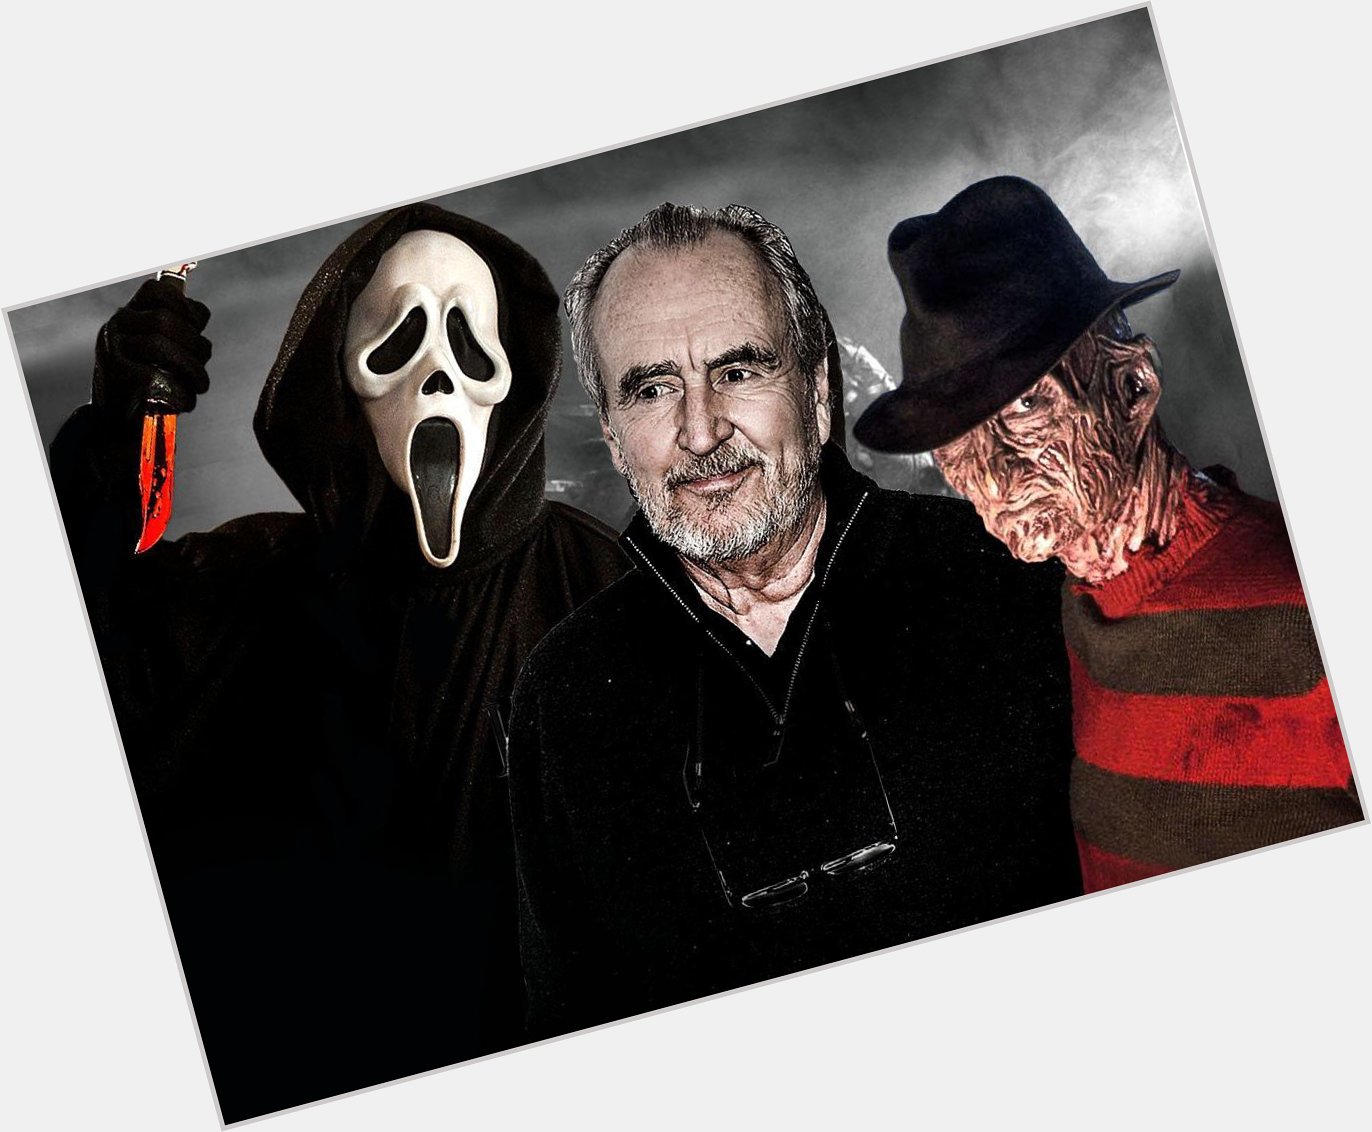 Happy birthday to the late but great Wes Craven. 
You are greatly missed. 